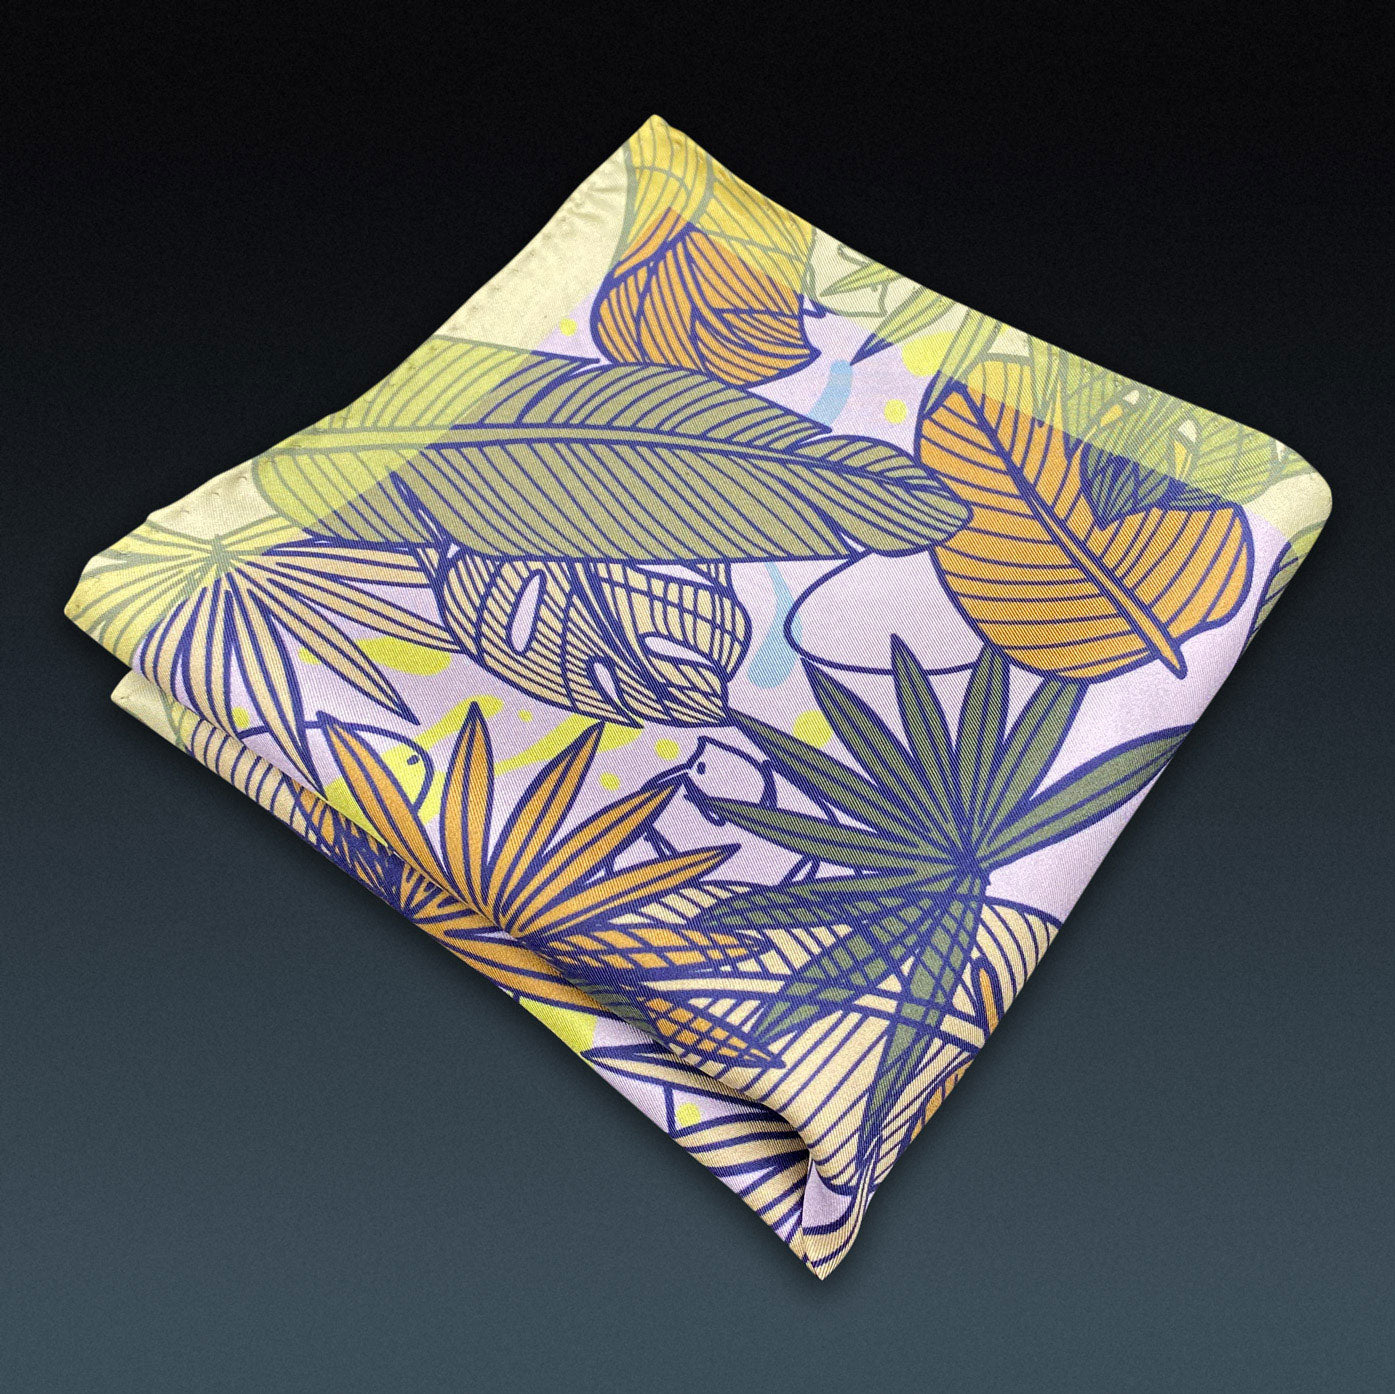 Folded 'Avon' silk pocket square from SOHO Scarves, showing the leaf montage pattern. Placed on a dark background.